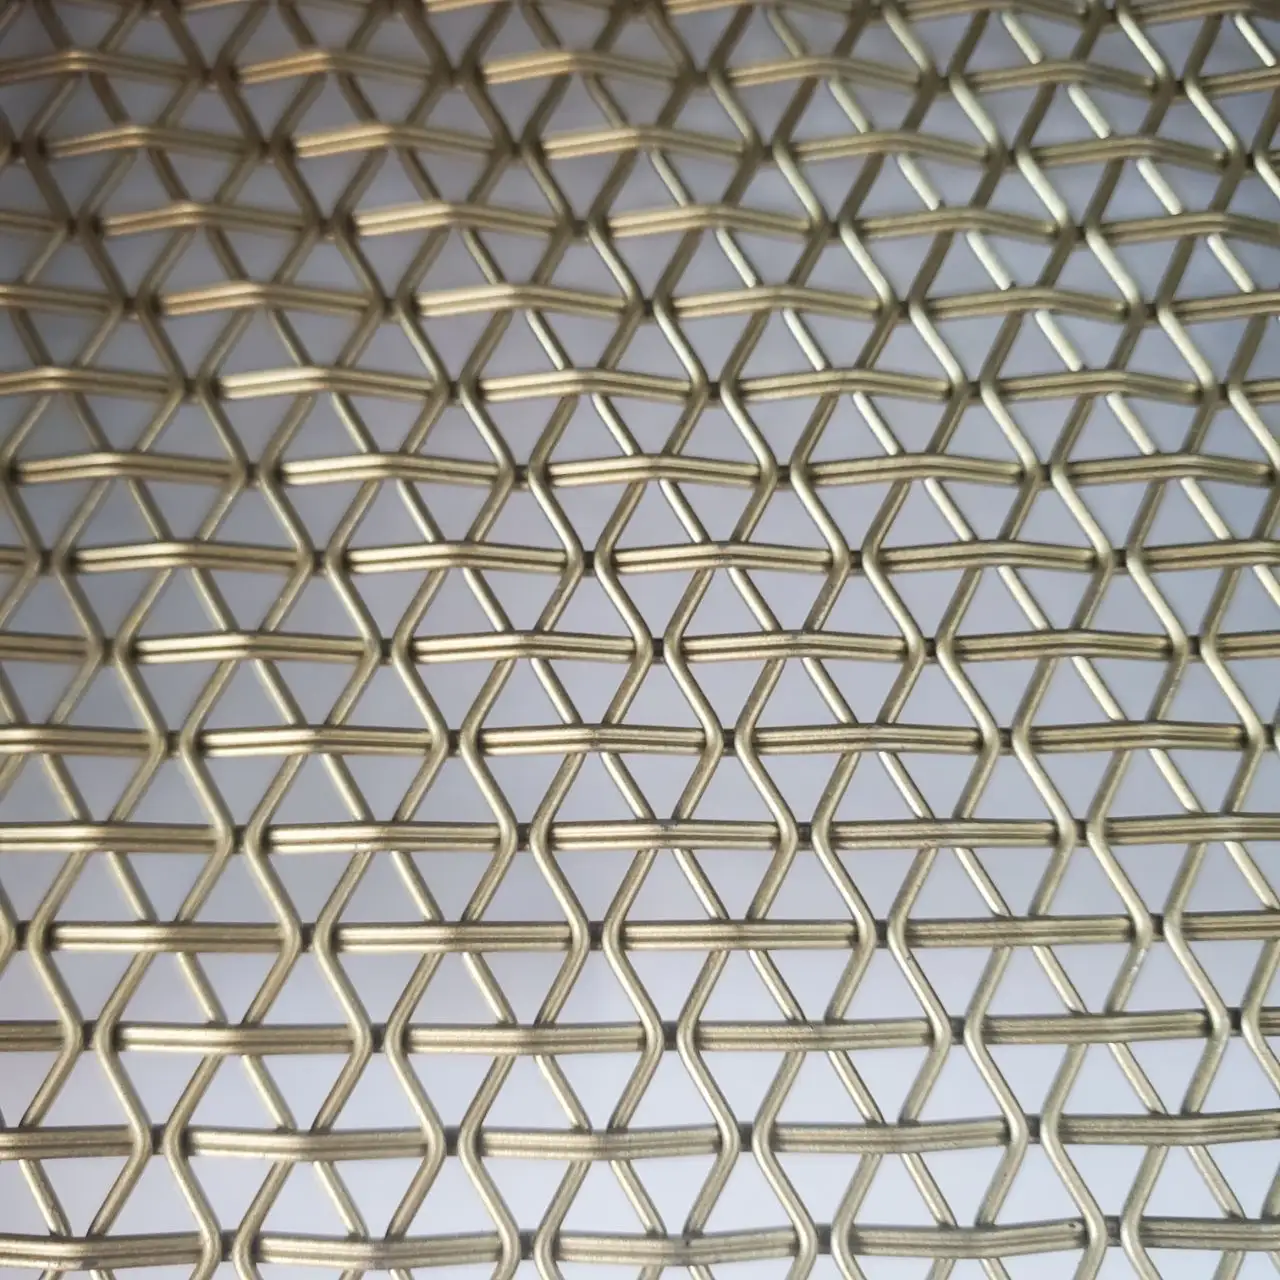 Woven Metal Decorative Wall Cladding Crimped Wire Mesh Stainless Steel Furnture Screen Flat Weaved Decorative Wire Mesh